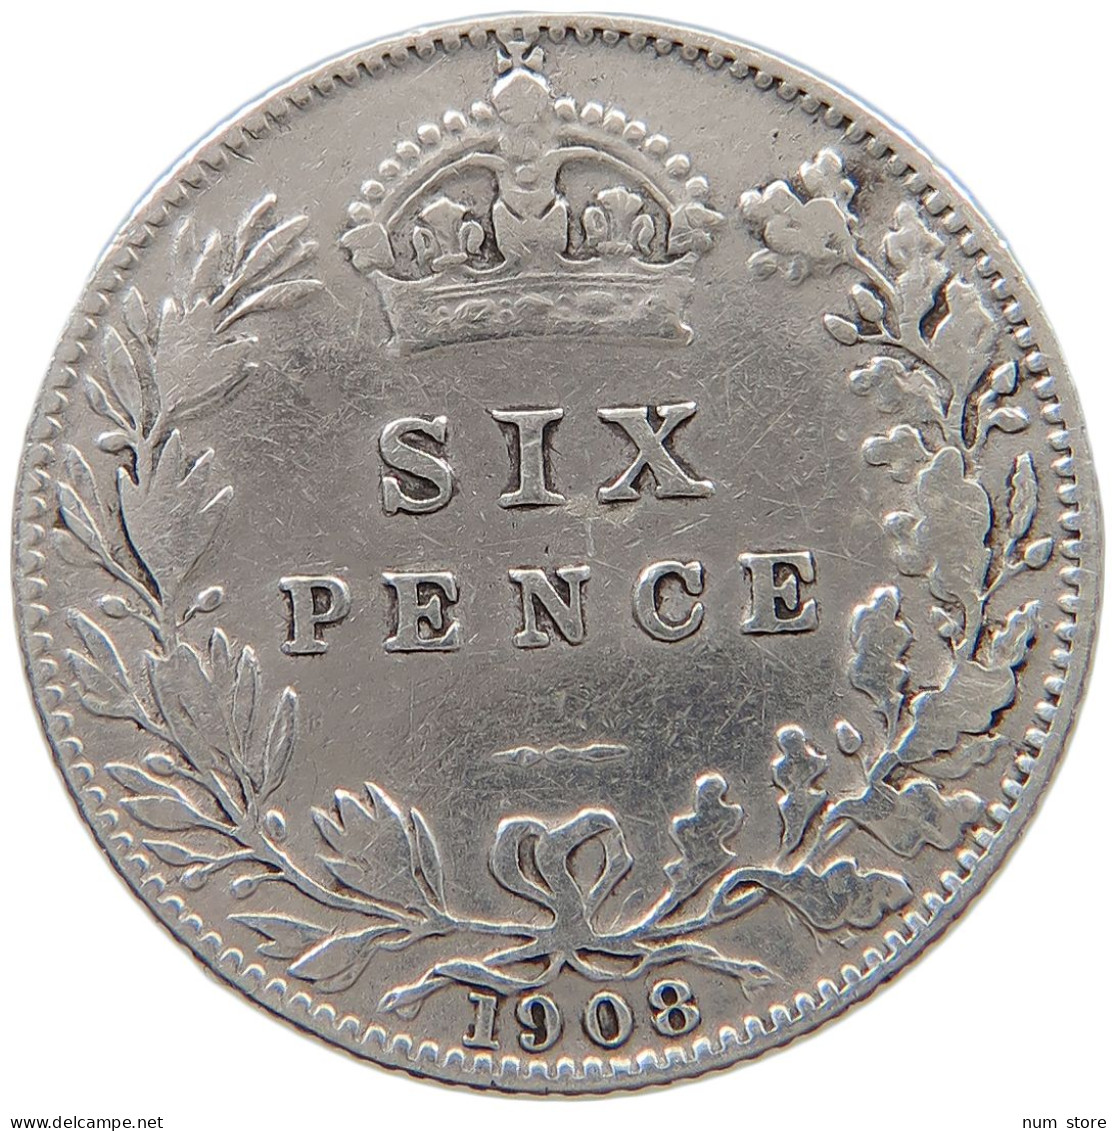 GREAT BRITAIN SIXPENCE 1908 Edward VII., 1901 - 1910 #a064 0305 - H. 6 Pence